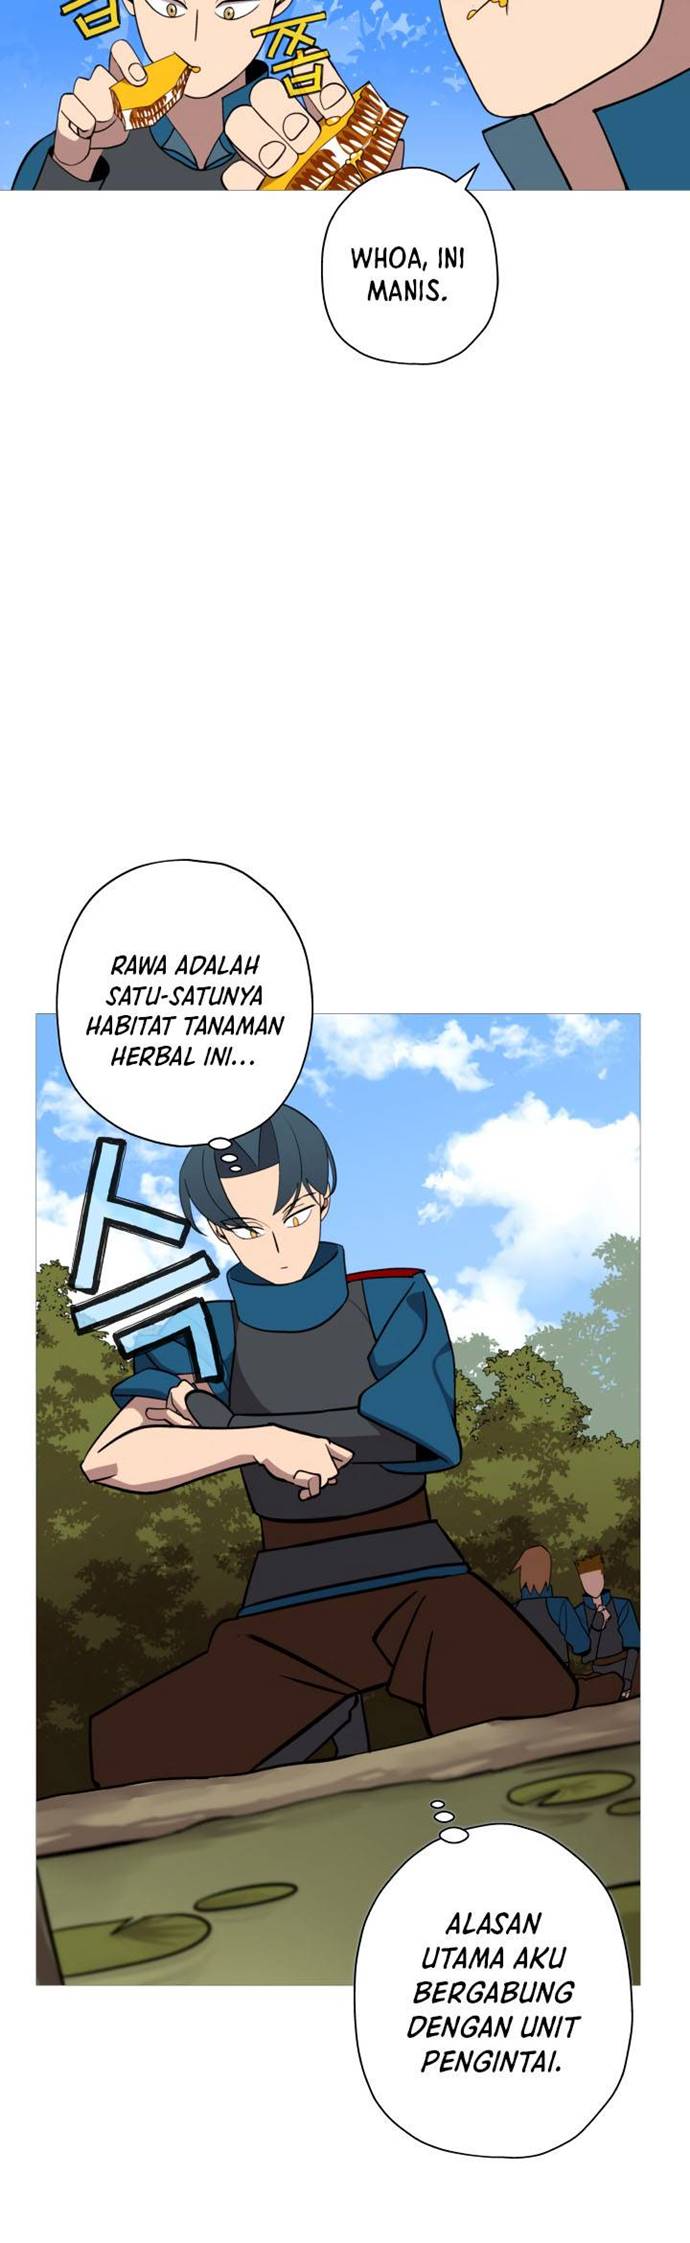 Dilarang COPAS - situs resmi www.mangacanblog.com - Komik the story of a low rank soldier becoming a monarch 007 - chapter 7 8 Indonesia the story of a low rank soldier becoming a monarch 007 - chapter 7 Terbaru 18|Baca Manga Komik Indonesia|Mangacan